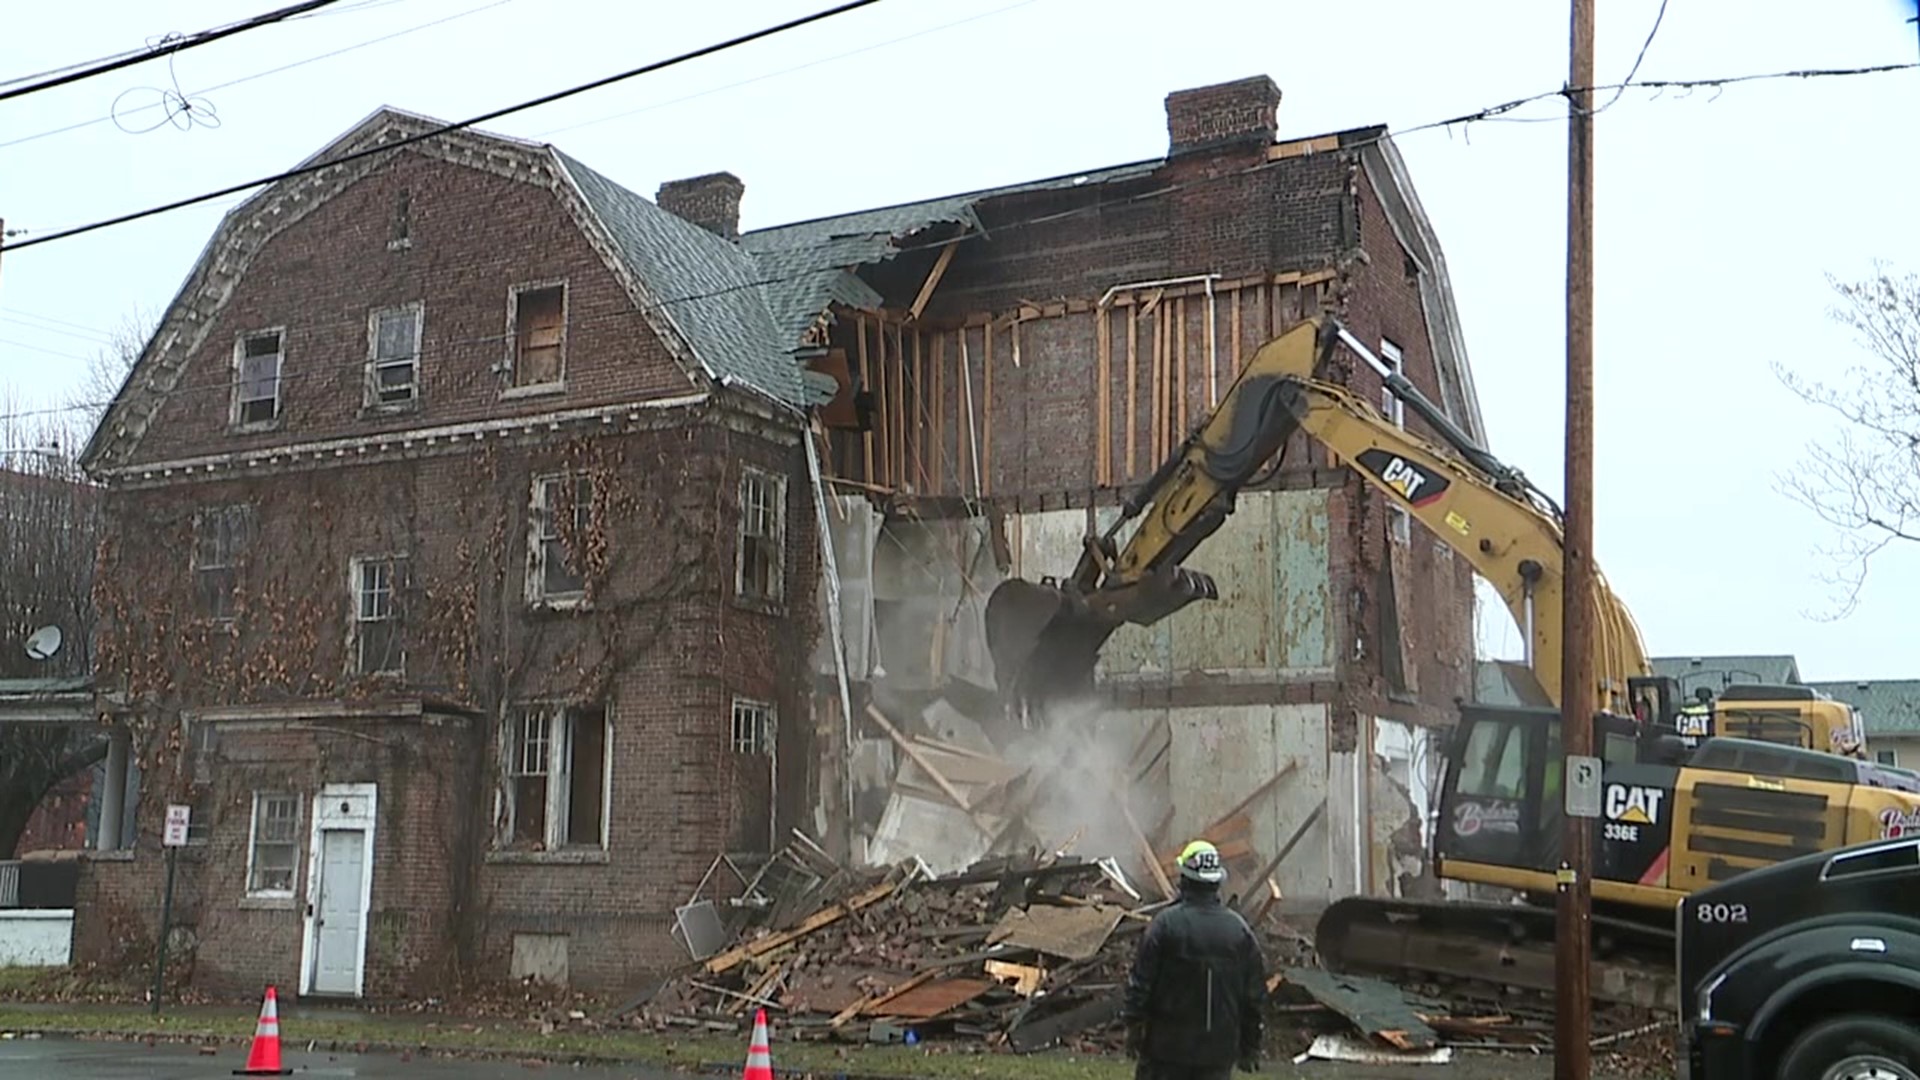 The city began work Thursday morning to remove the old structures on South Franklin Street.